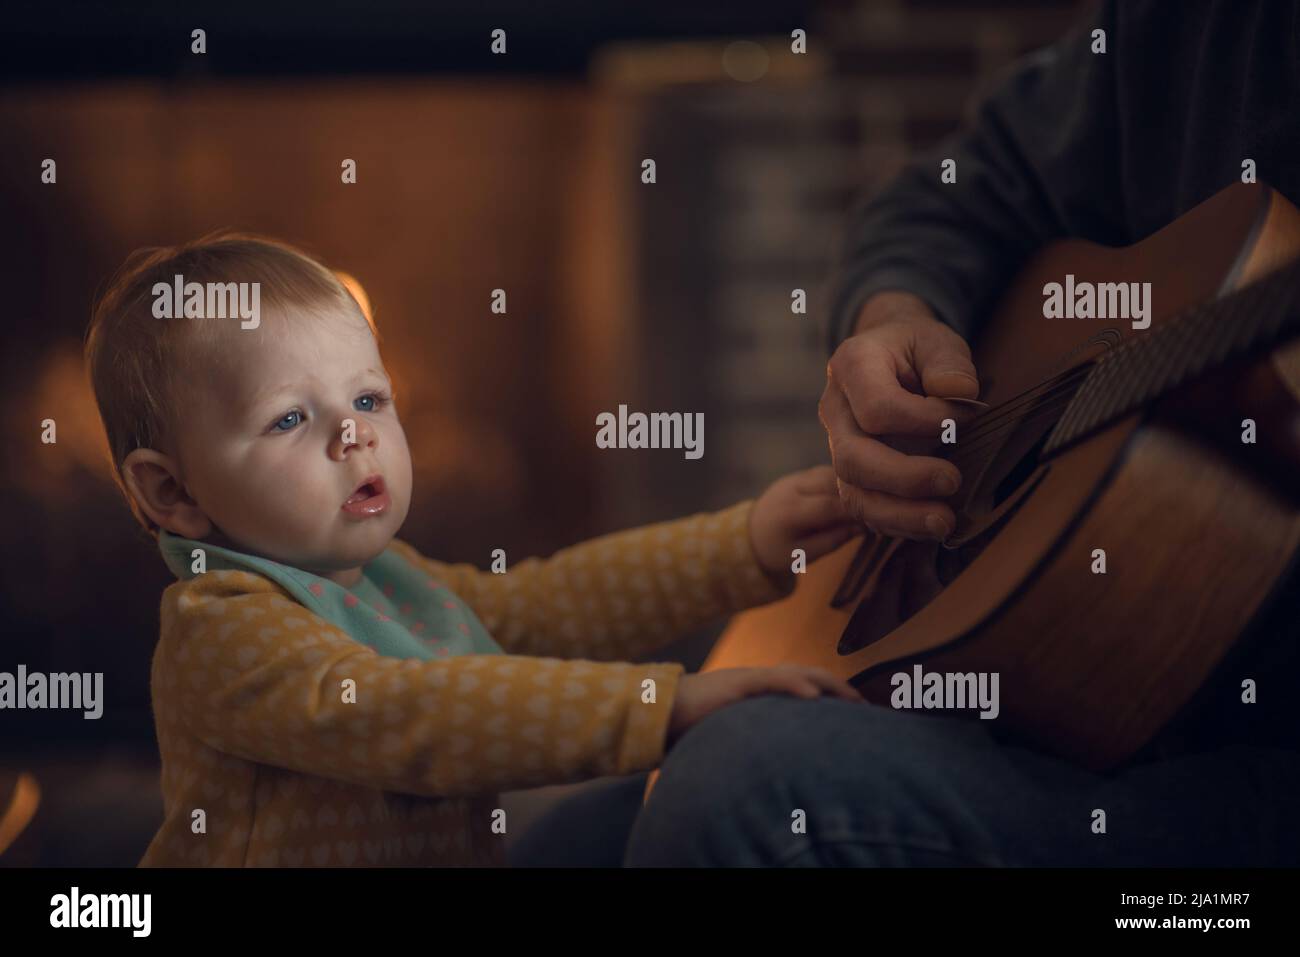 Baby watching a guitar being played Stock Photo